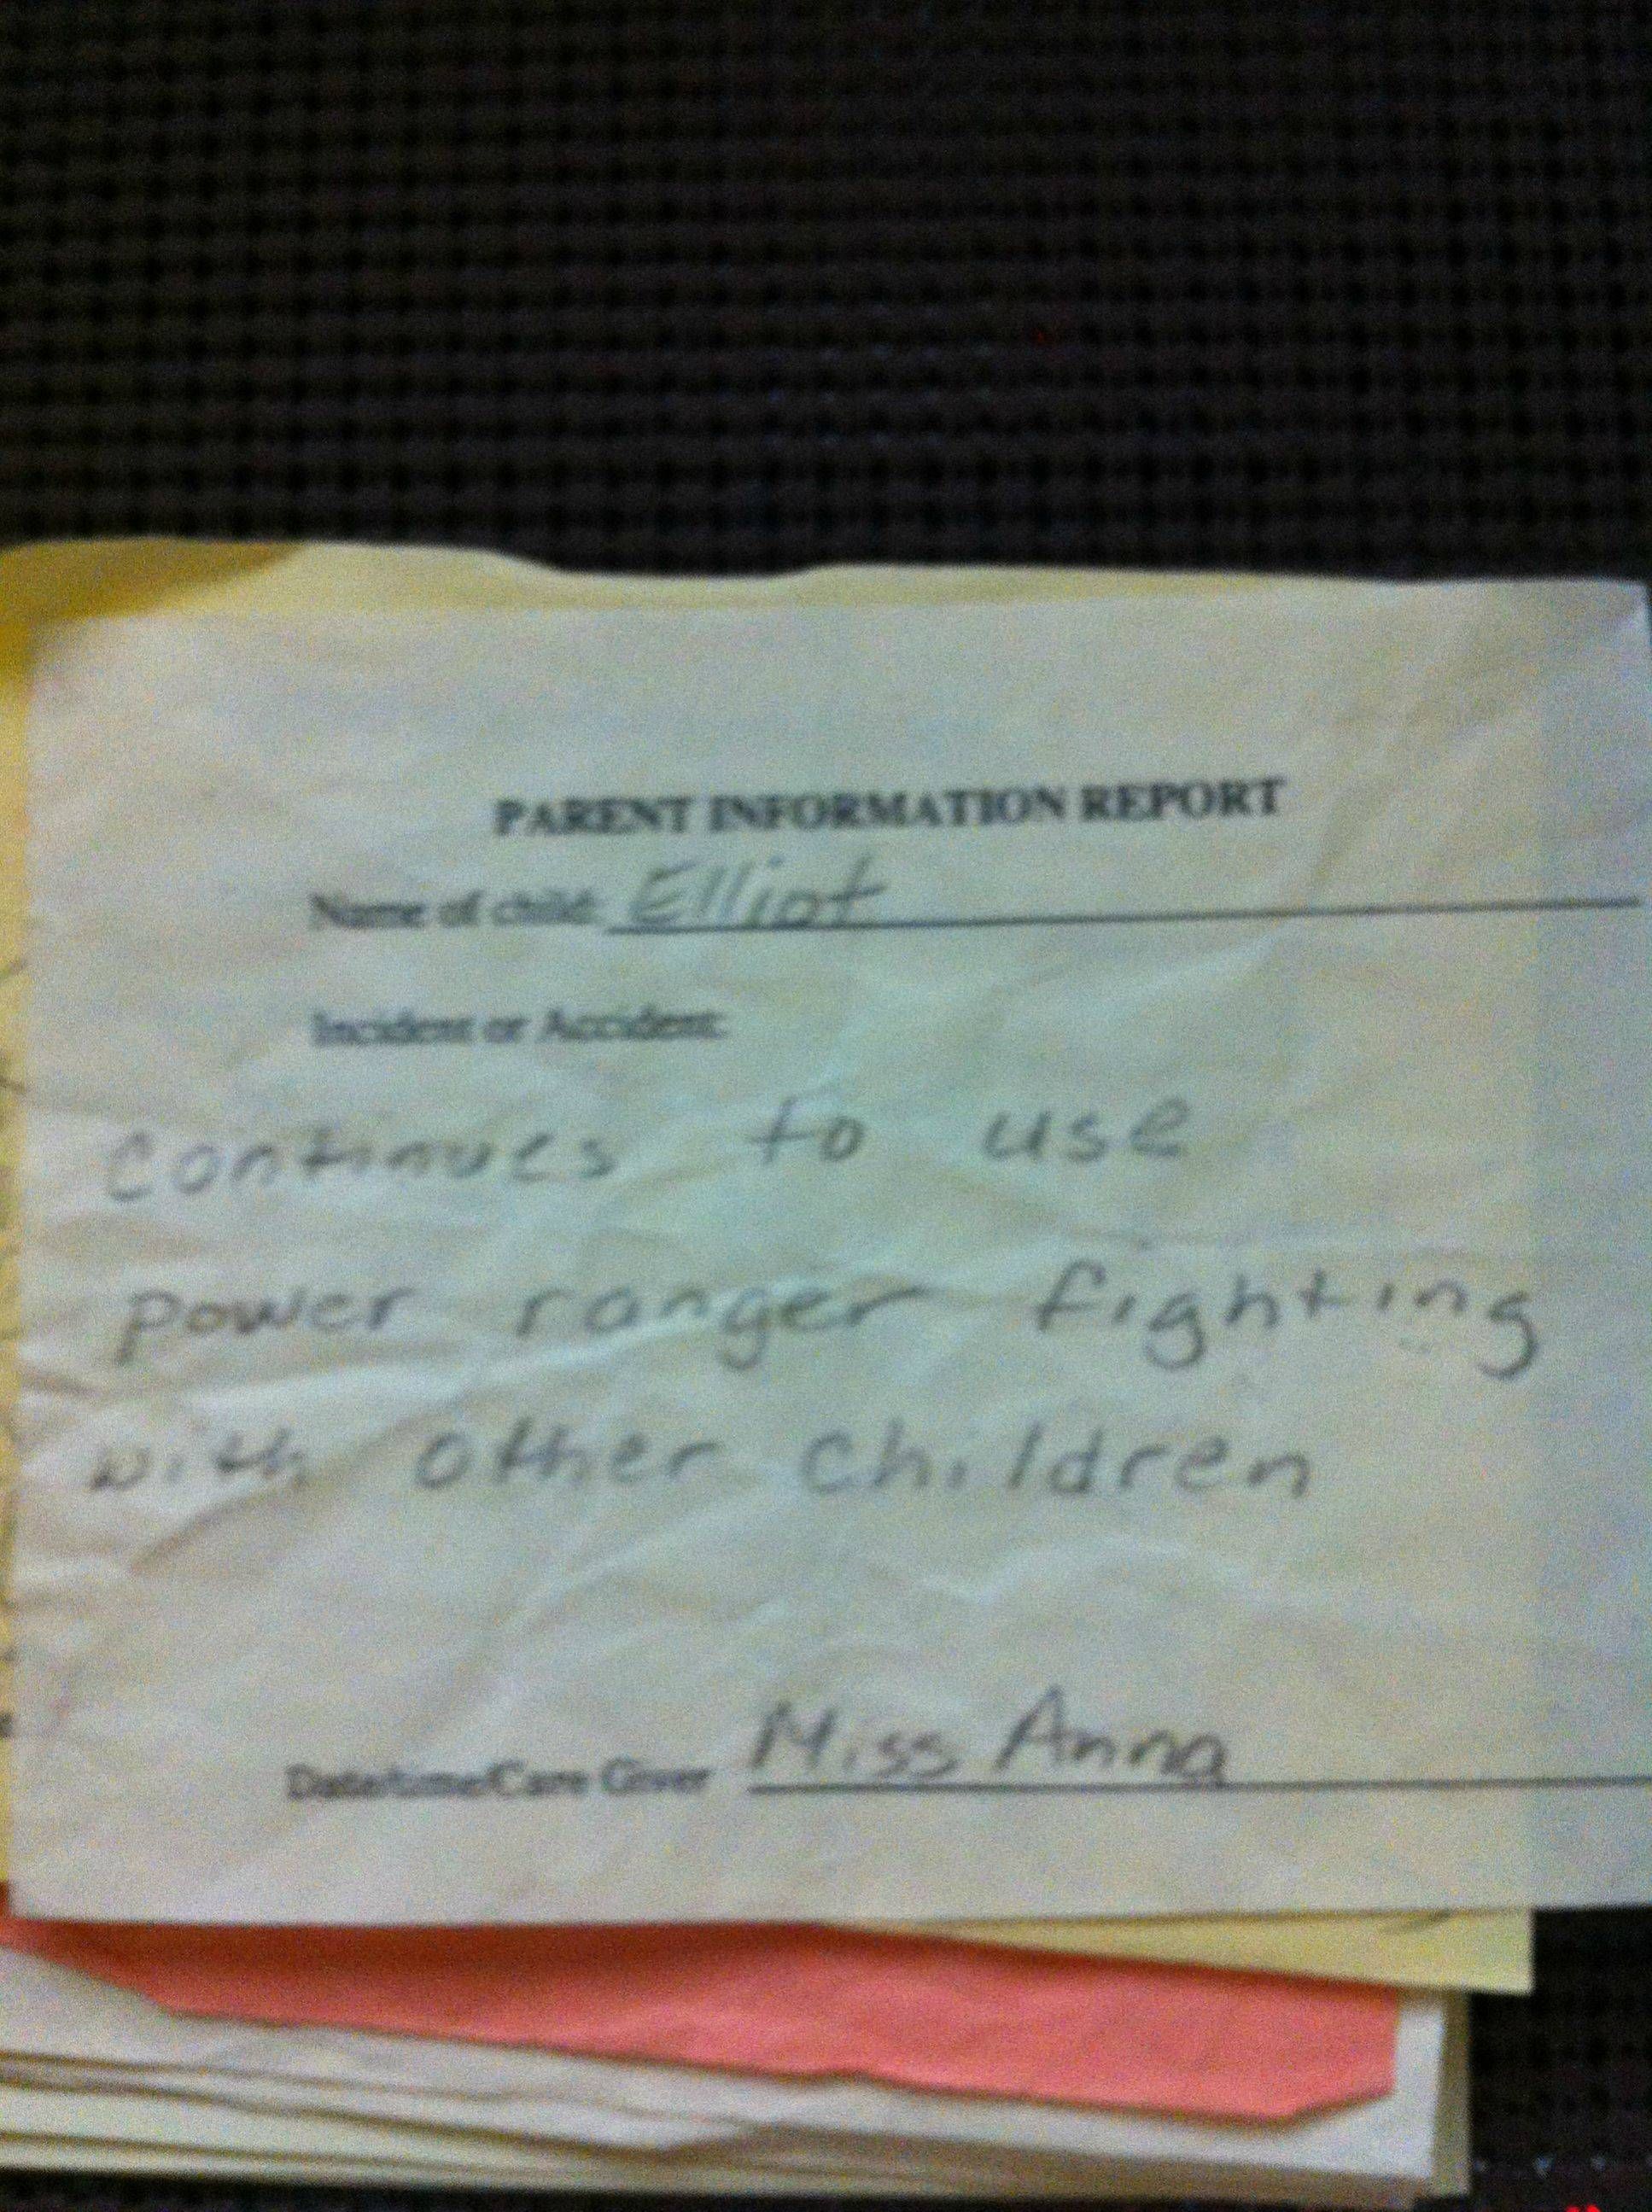 So I found behavior reports from my childhood.